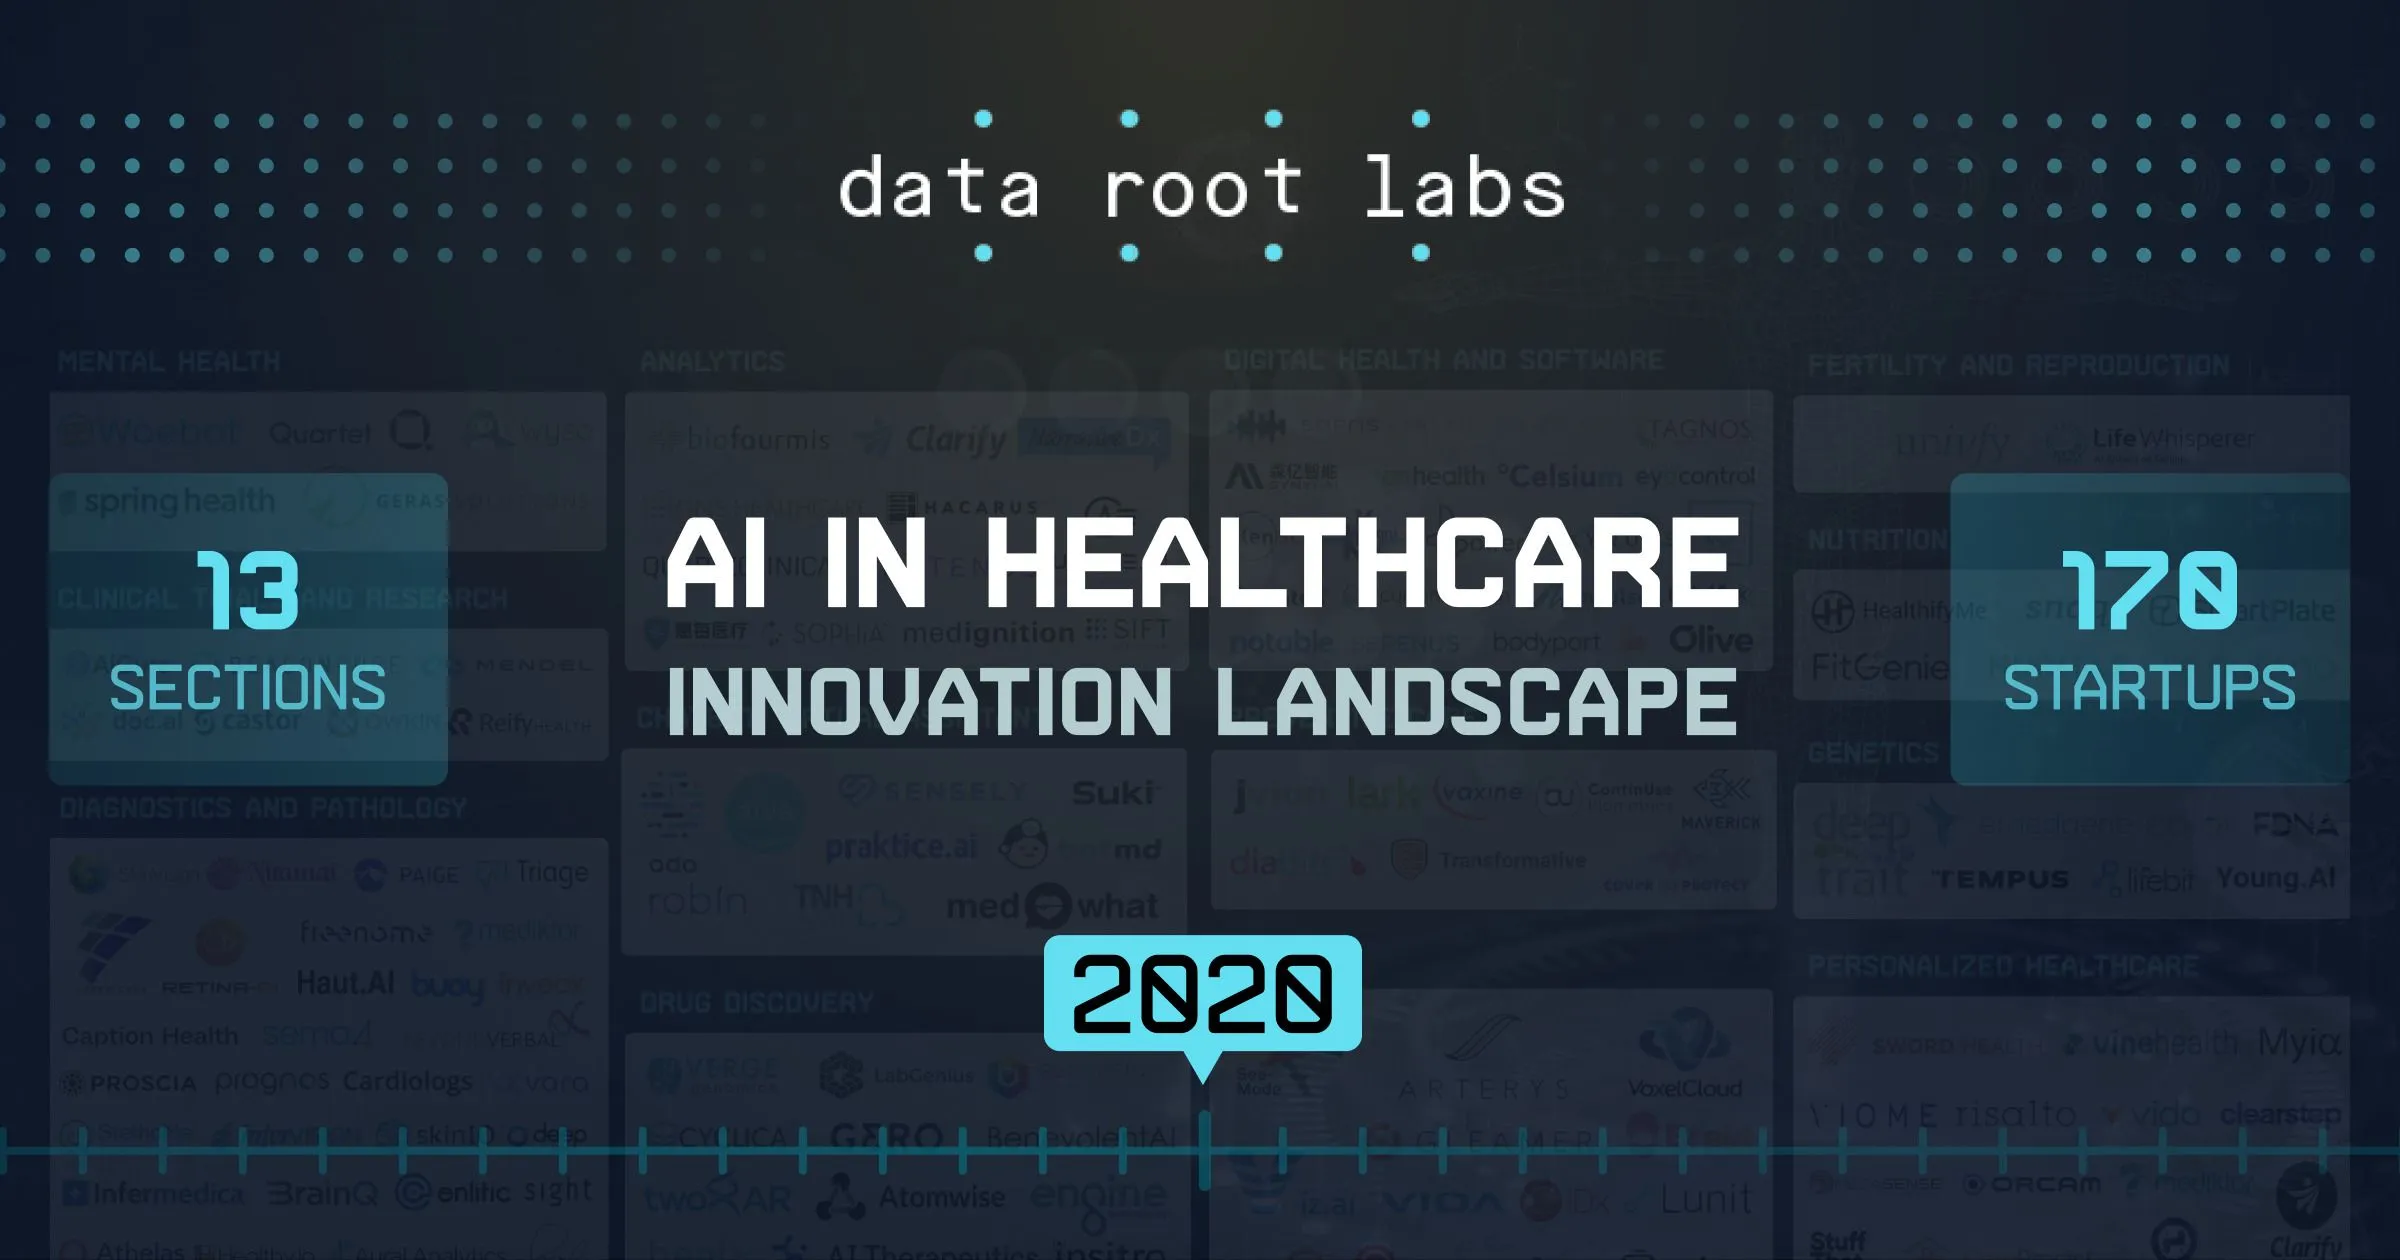 AI in Healthcare: How AI Helps Healthcare Companies and Medical Startups